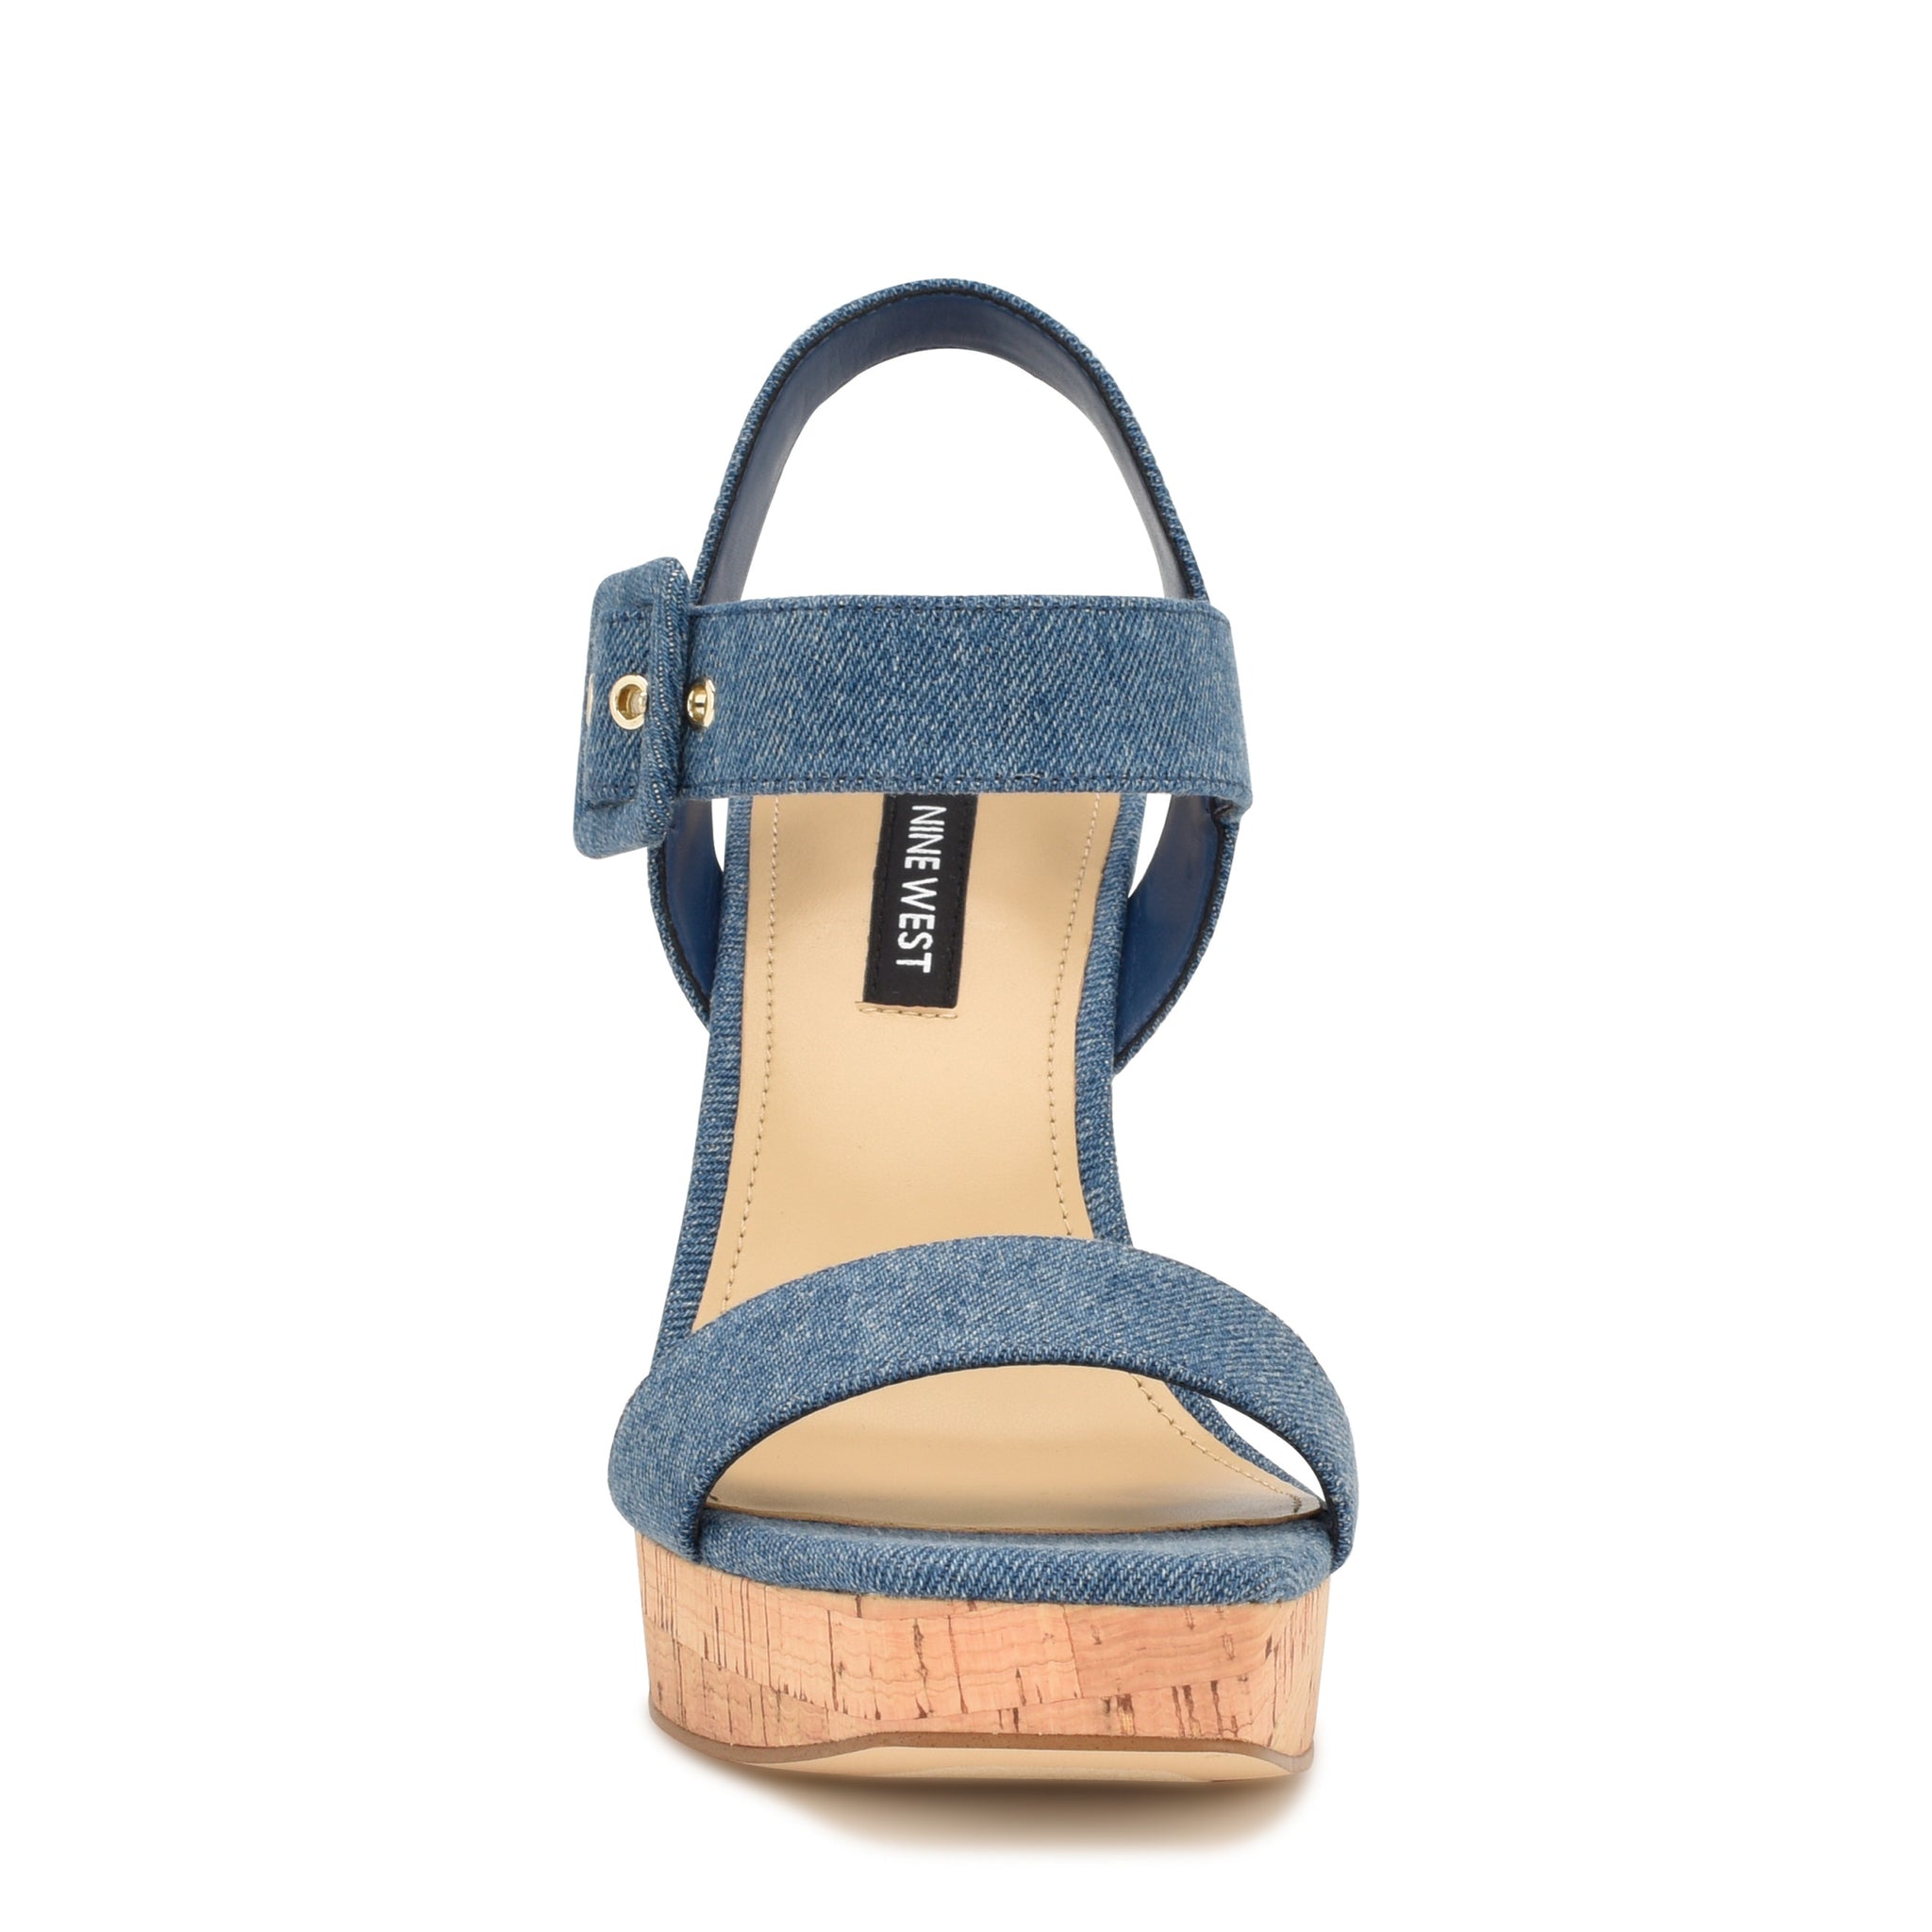 Courts Wedge Sandals - Nine West